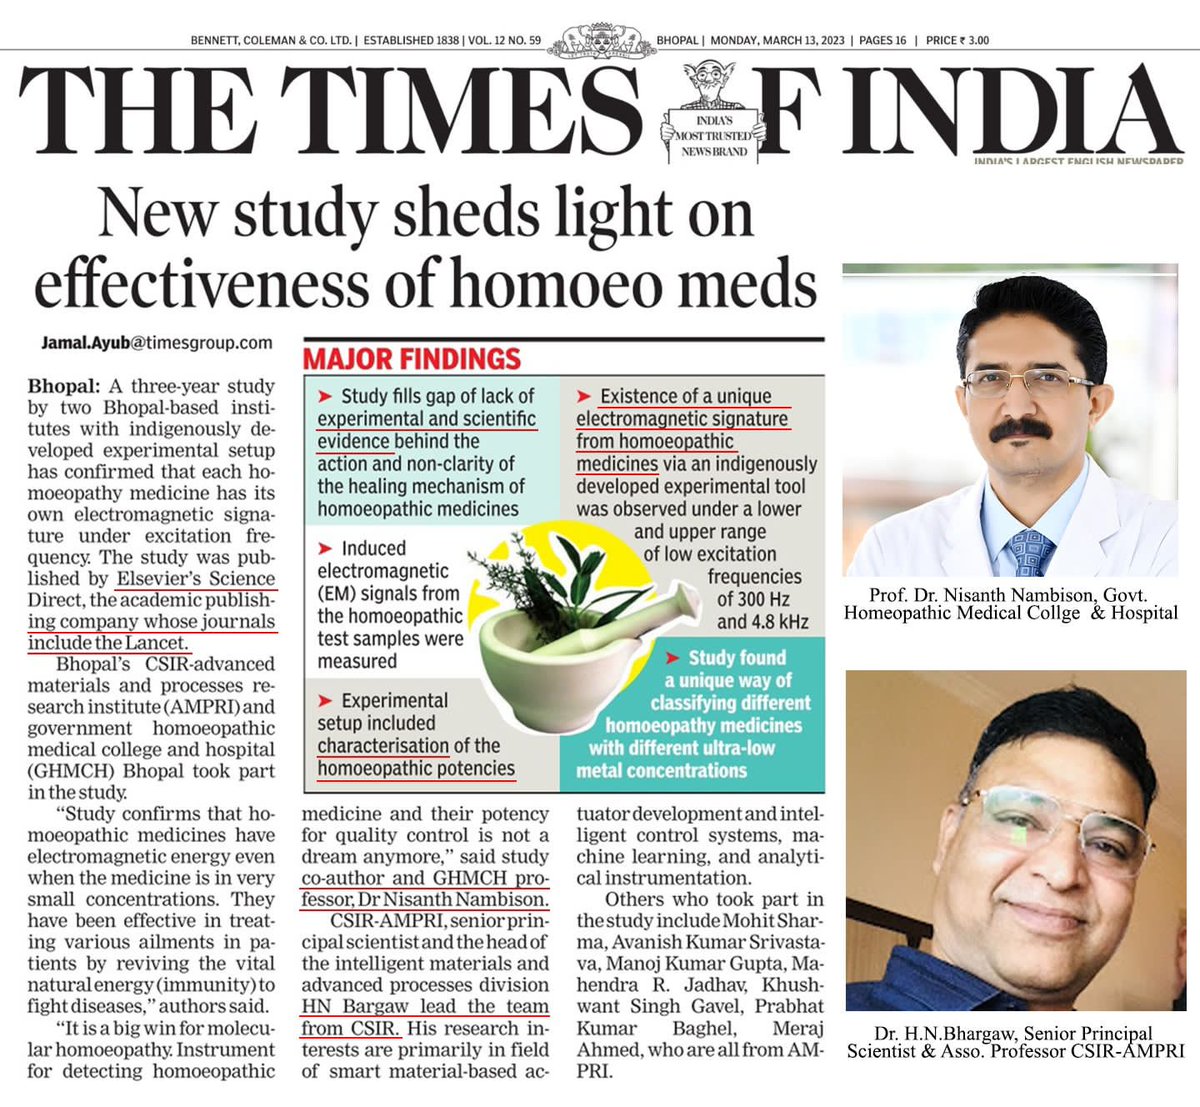 I don't know how to break this to you

But India's largest newspaper has reported that a couple of Homeopaths in Bhopal city has discovered that the reason why Homeopathy works is...

...because of electromagnetic waves.

First, Homeopaths said, Homeopathy works because of water